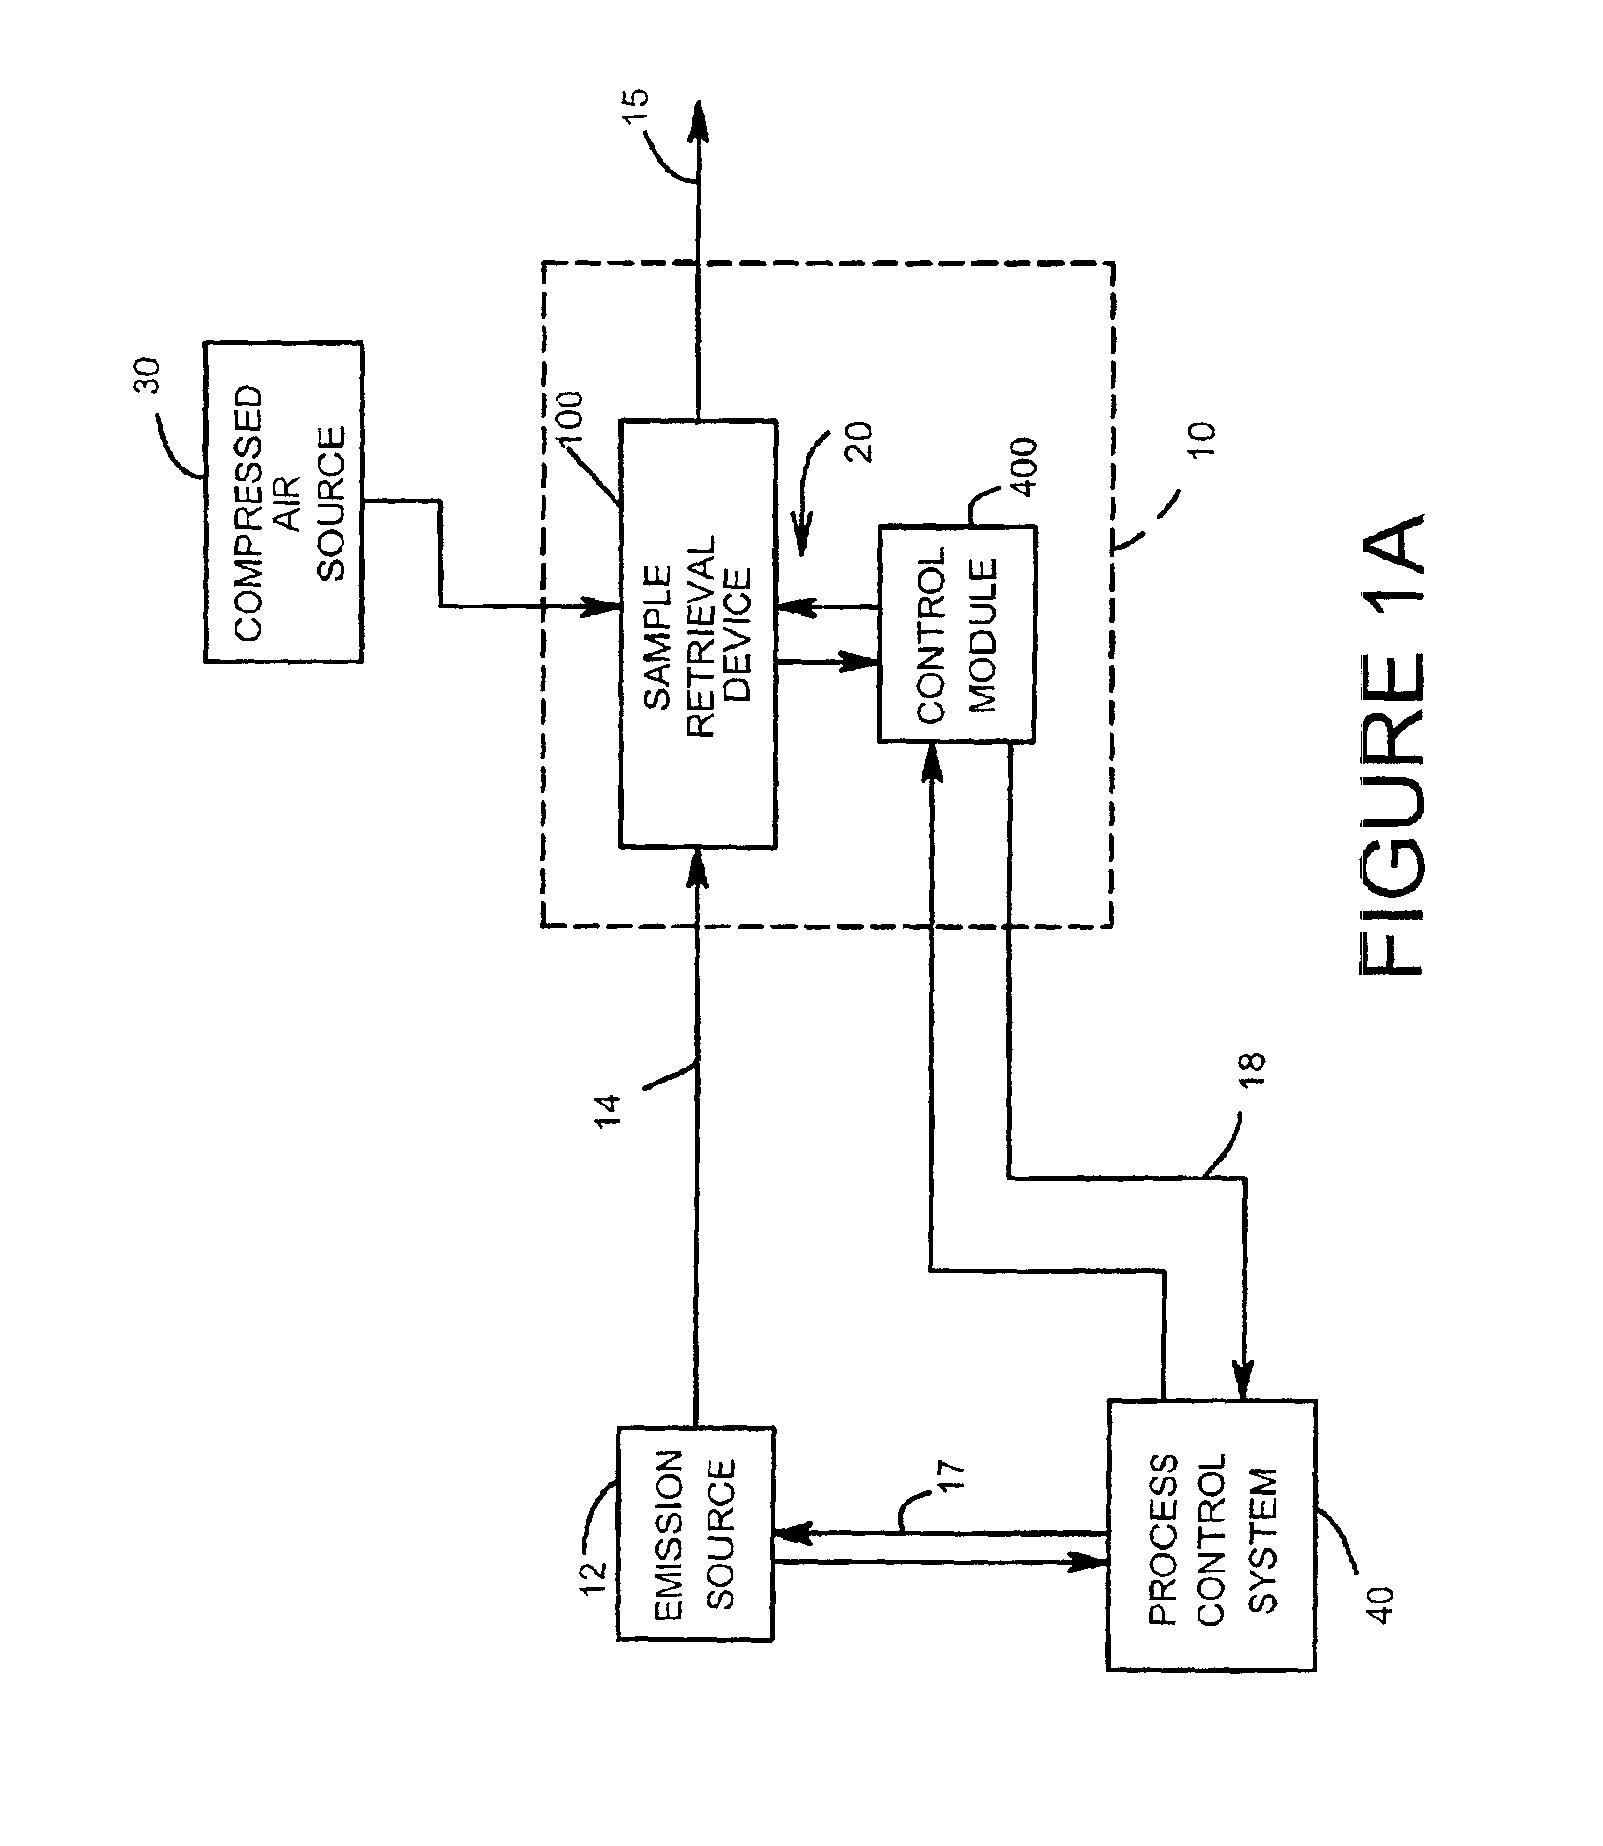 Diagnostic apparatus and methods for a chemical detection system